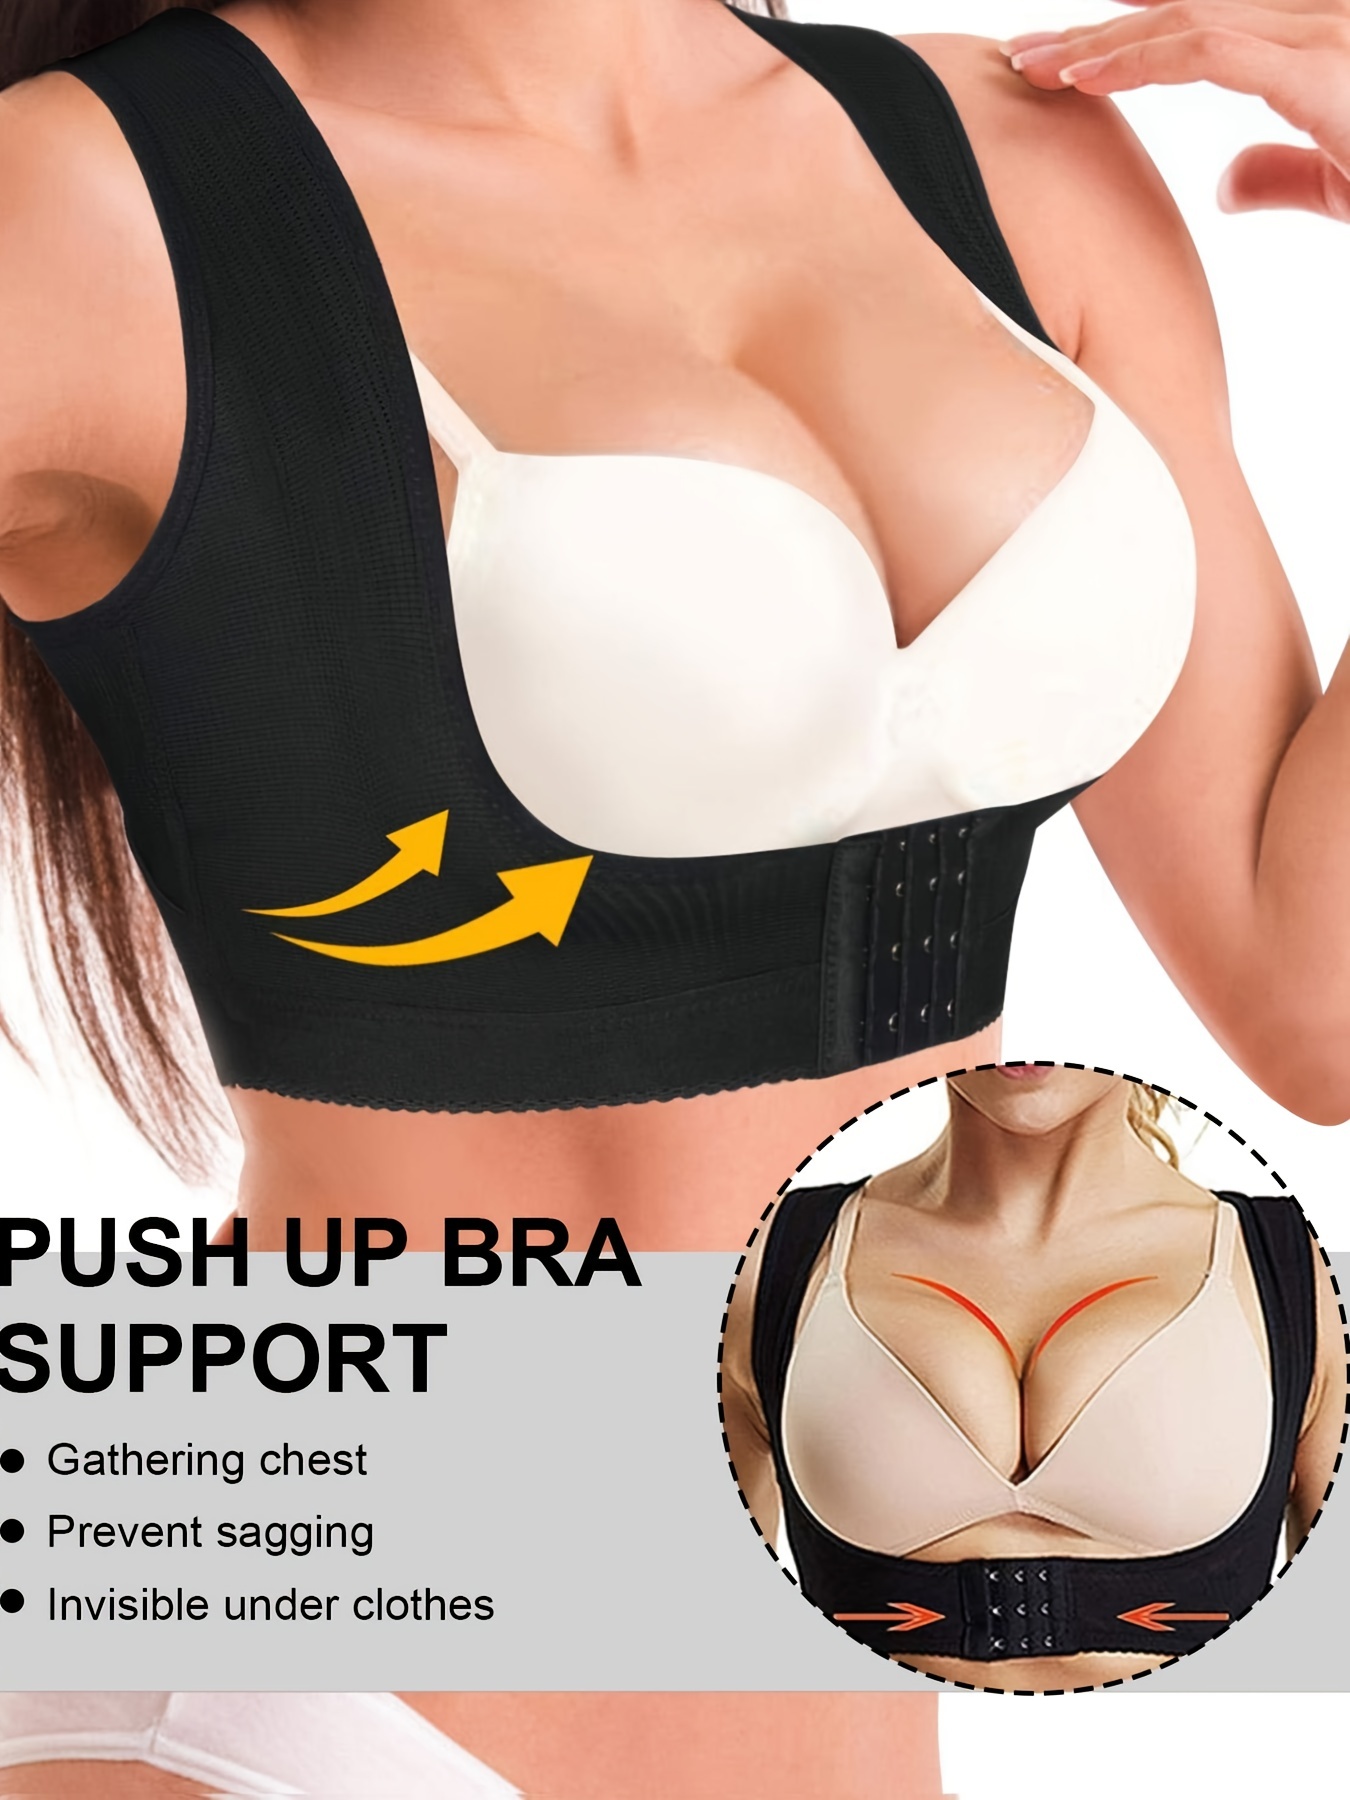 Chest Brace Up for Women Posture Corrector Shapewear Top Back Support Bra  Shaper